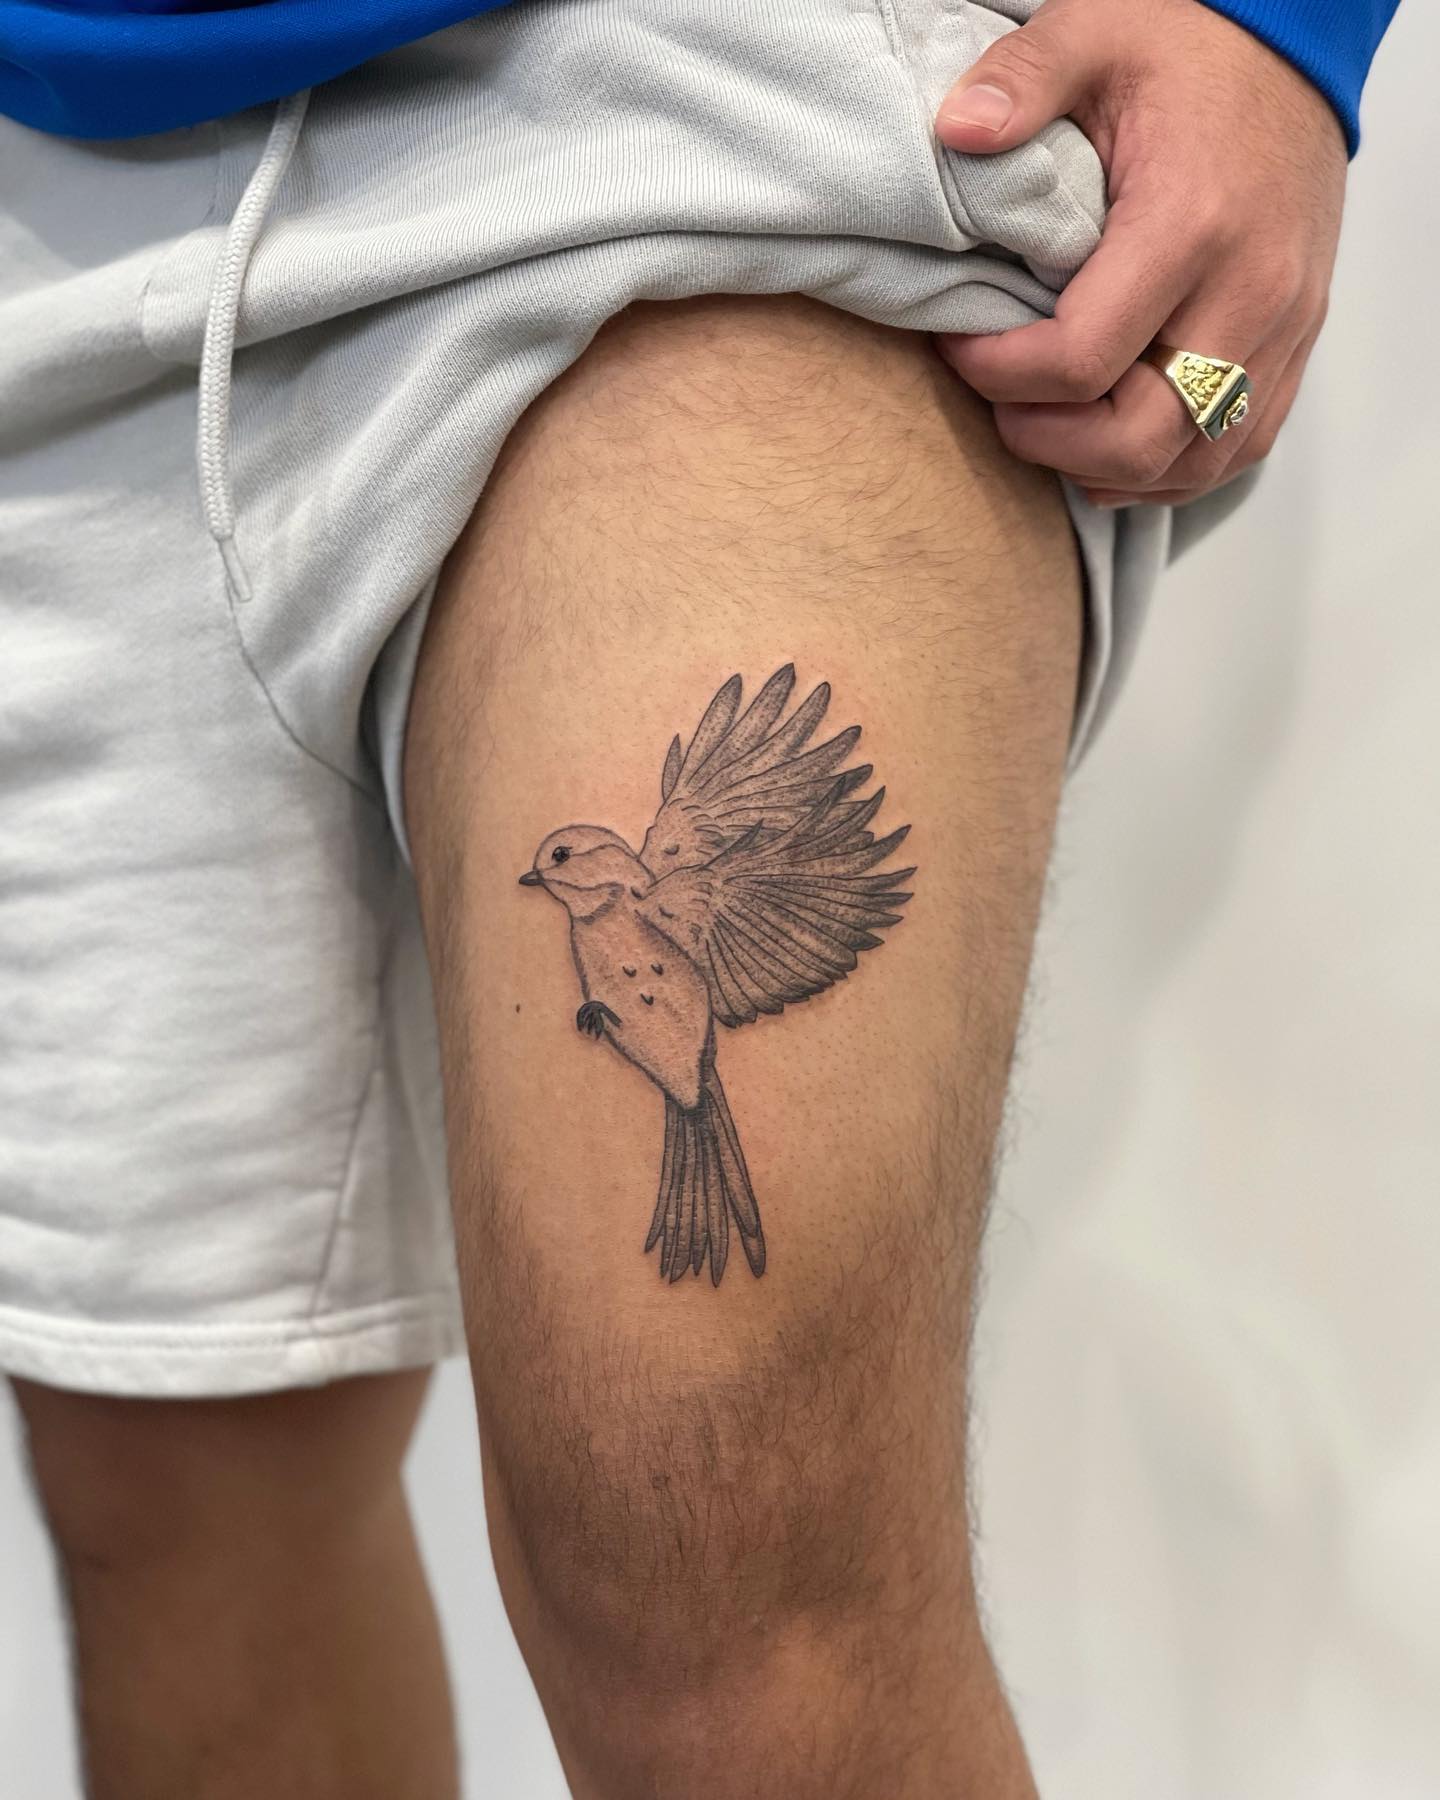 30+ Thigh Tattoos for Men That Will Turn Heads in 2023 - 100 Tattoos